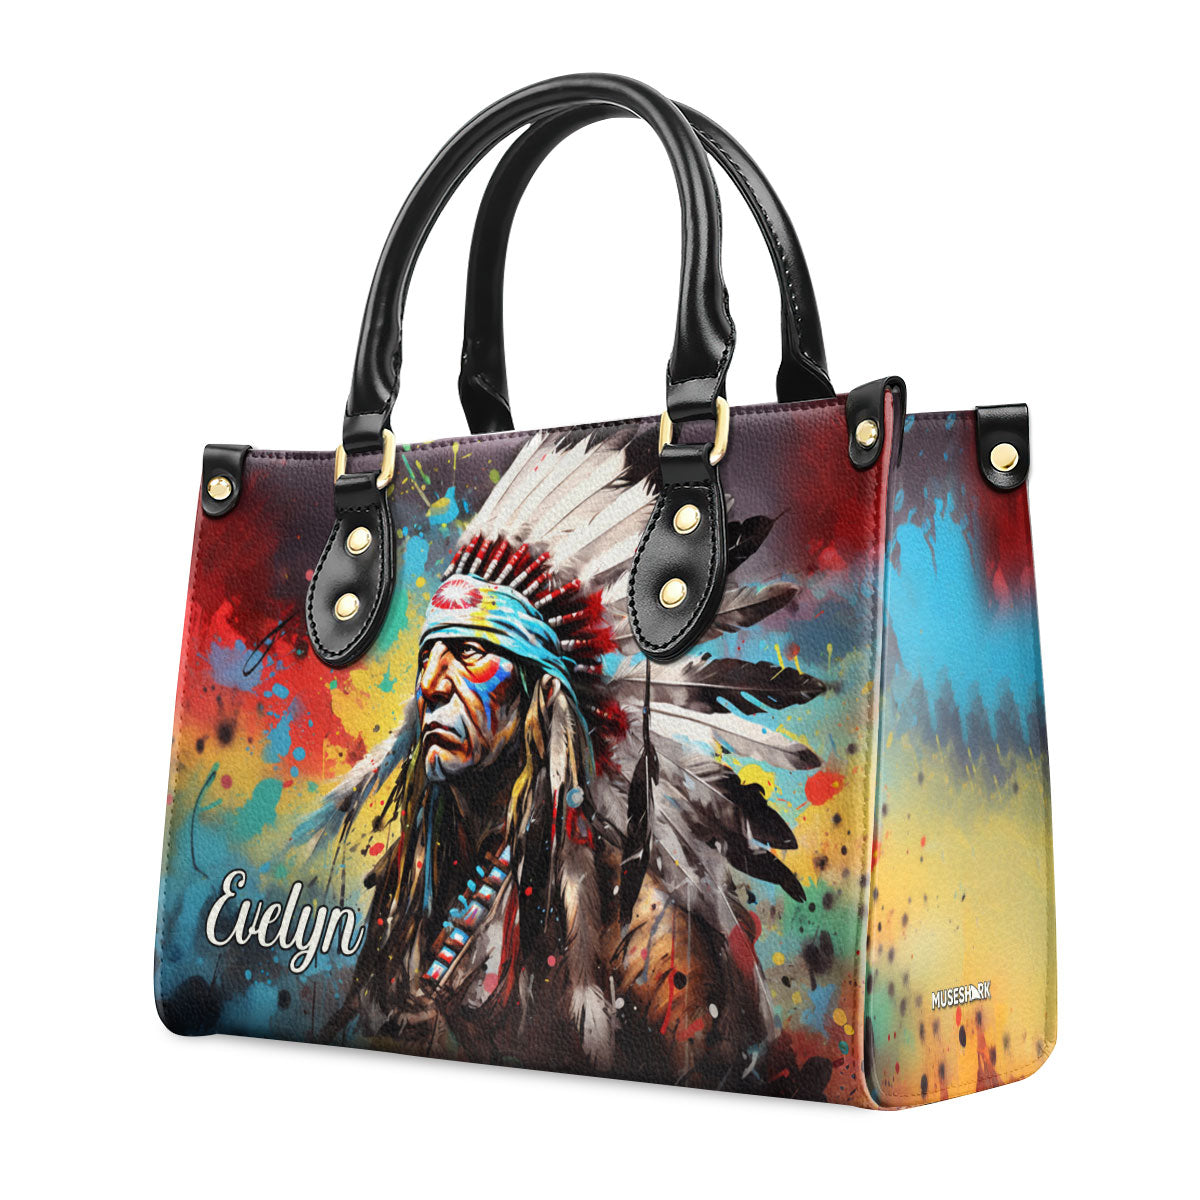 Native American Culture - Personalized Leather Handbag MS119